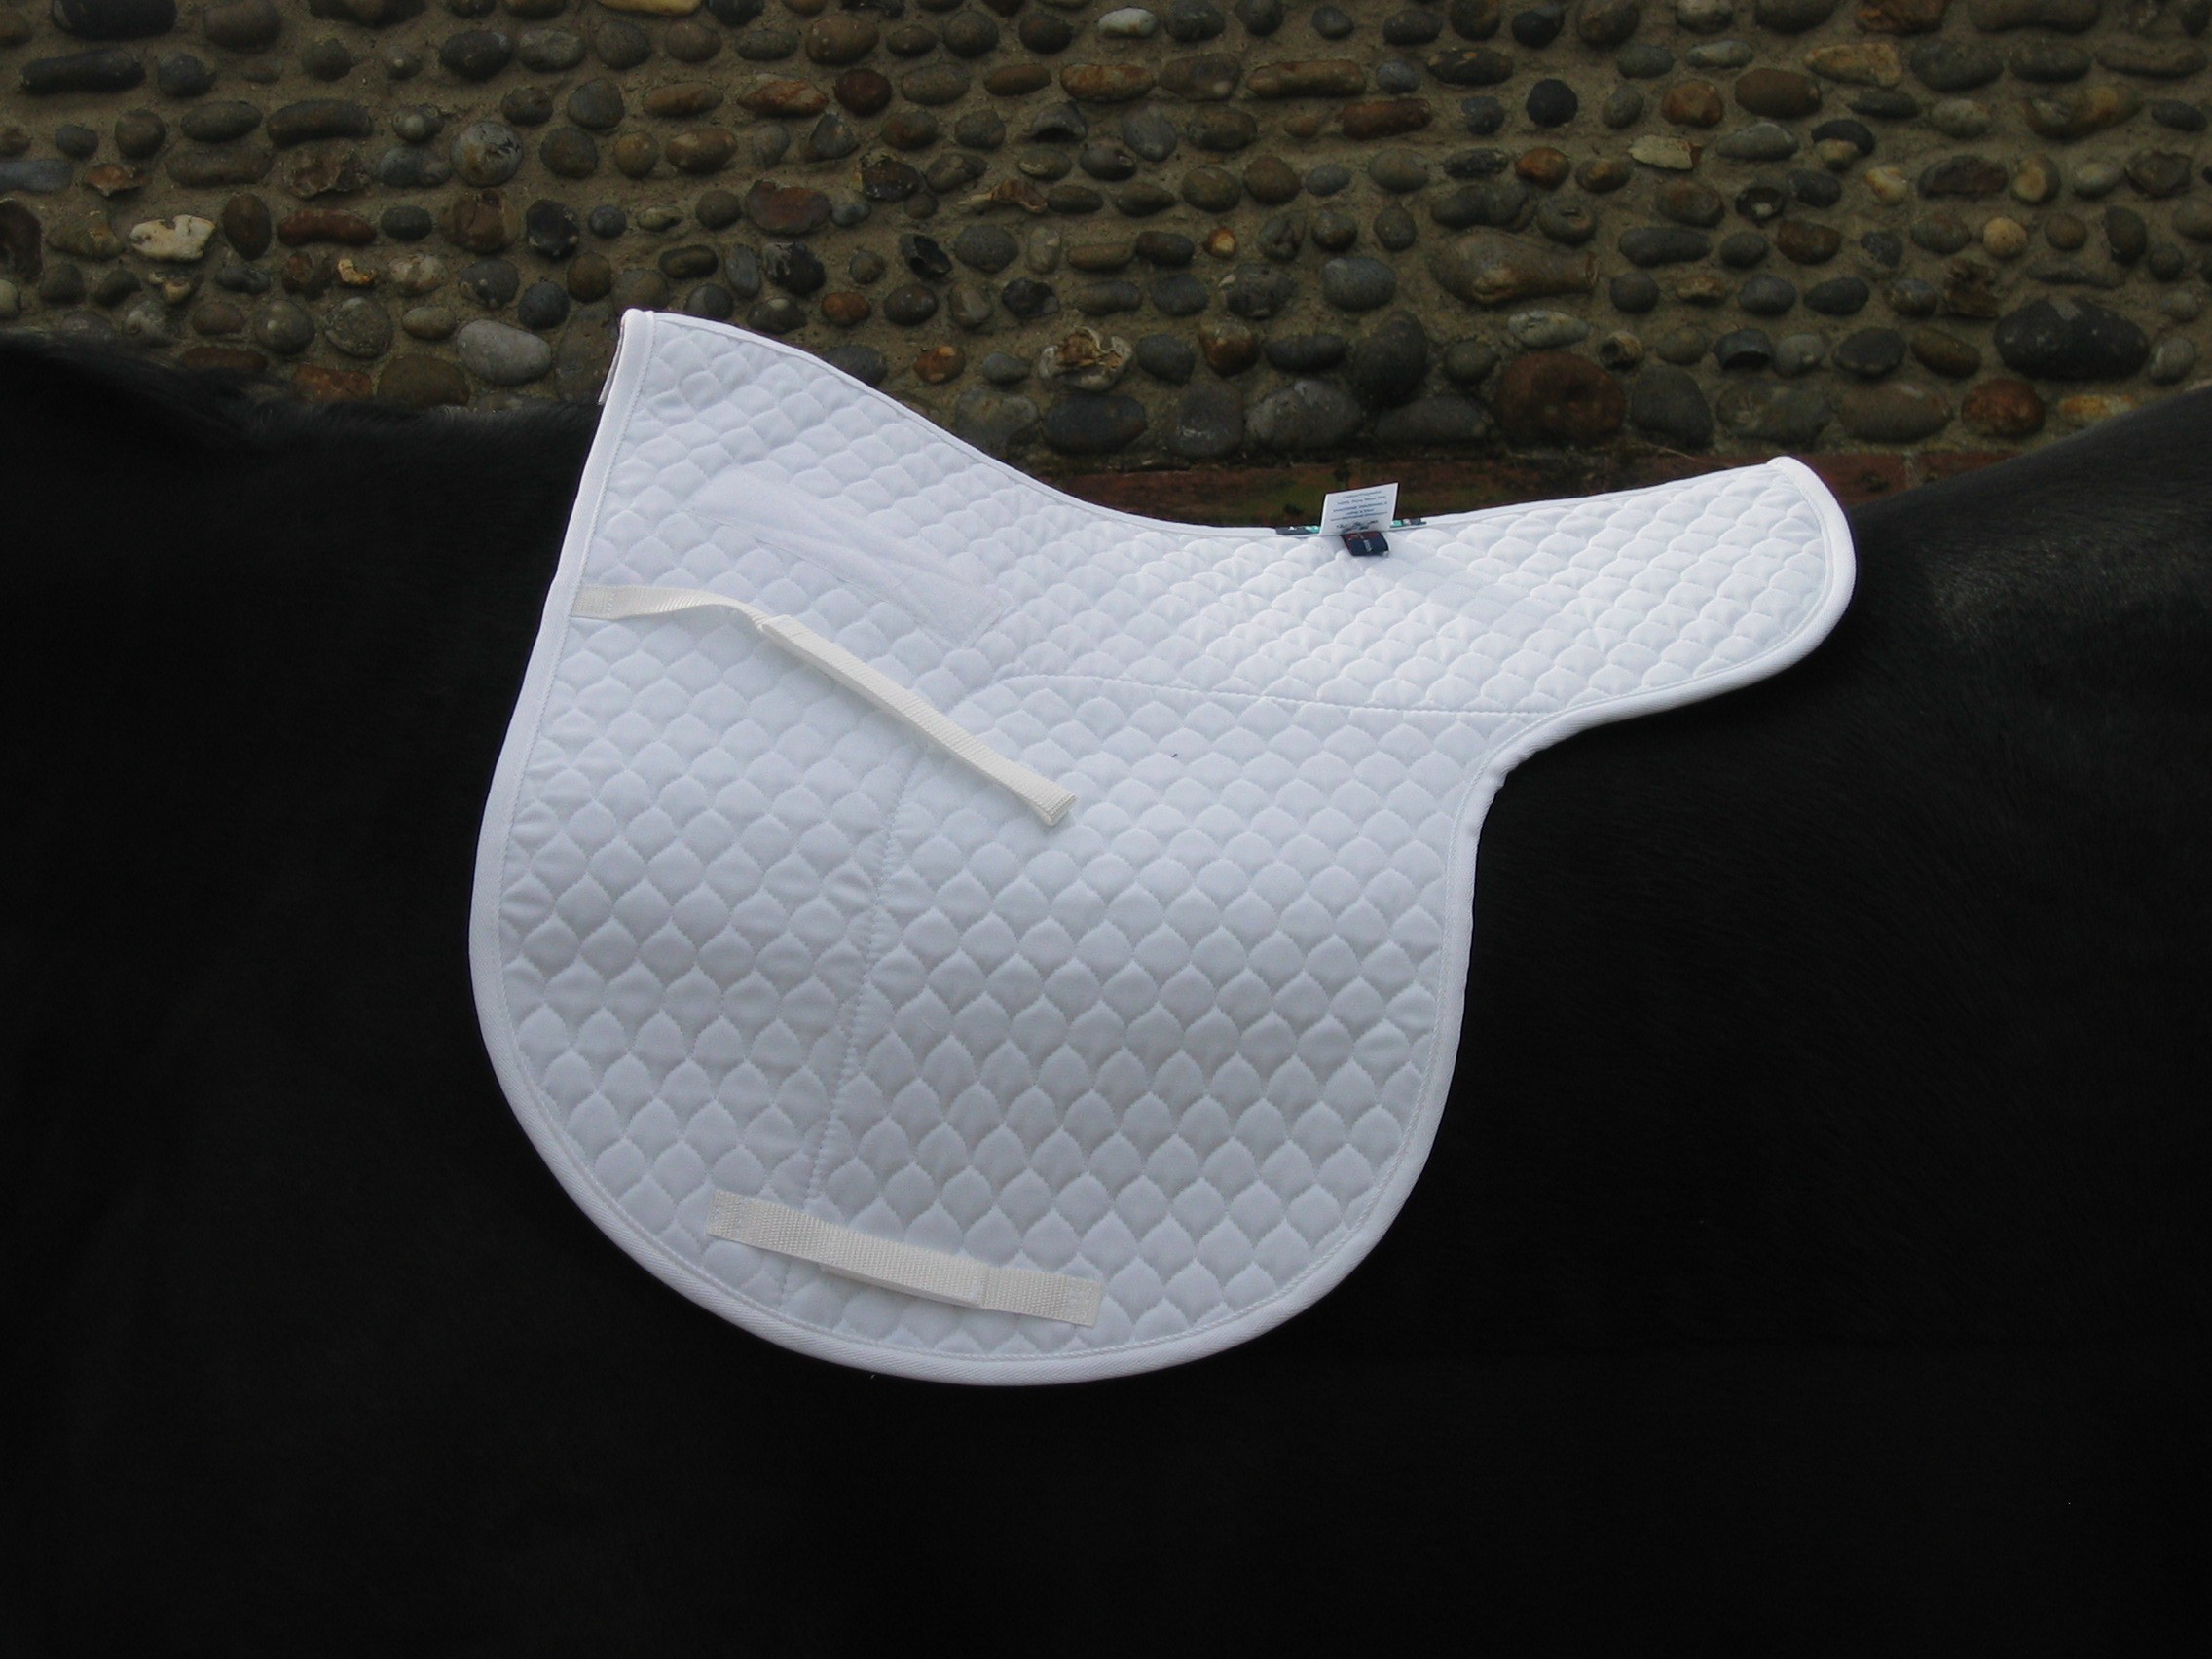 Standard Quilt, for most BALANCE Saddle styles.